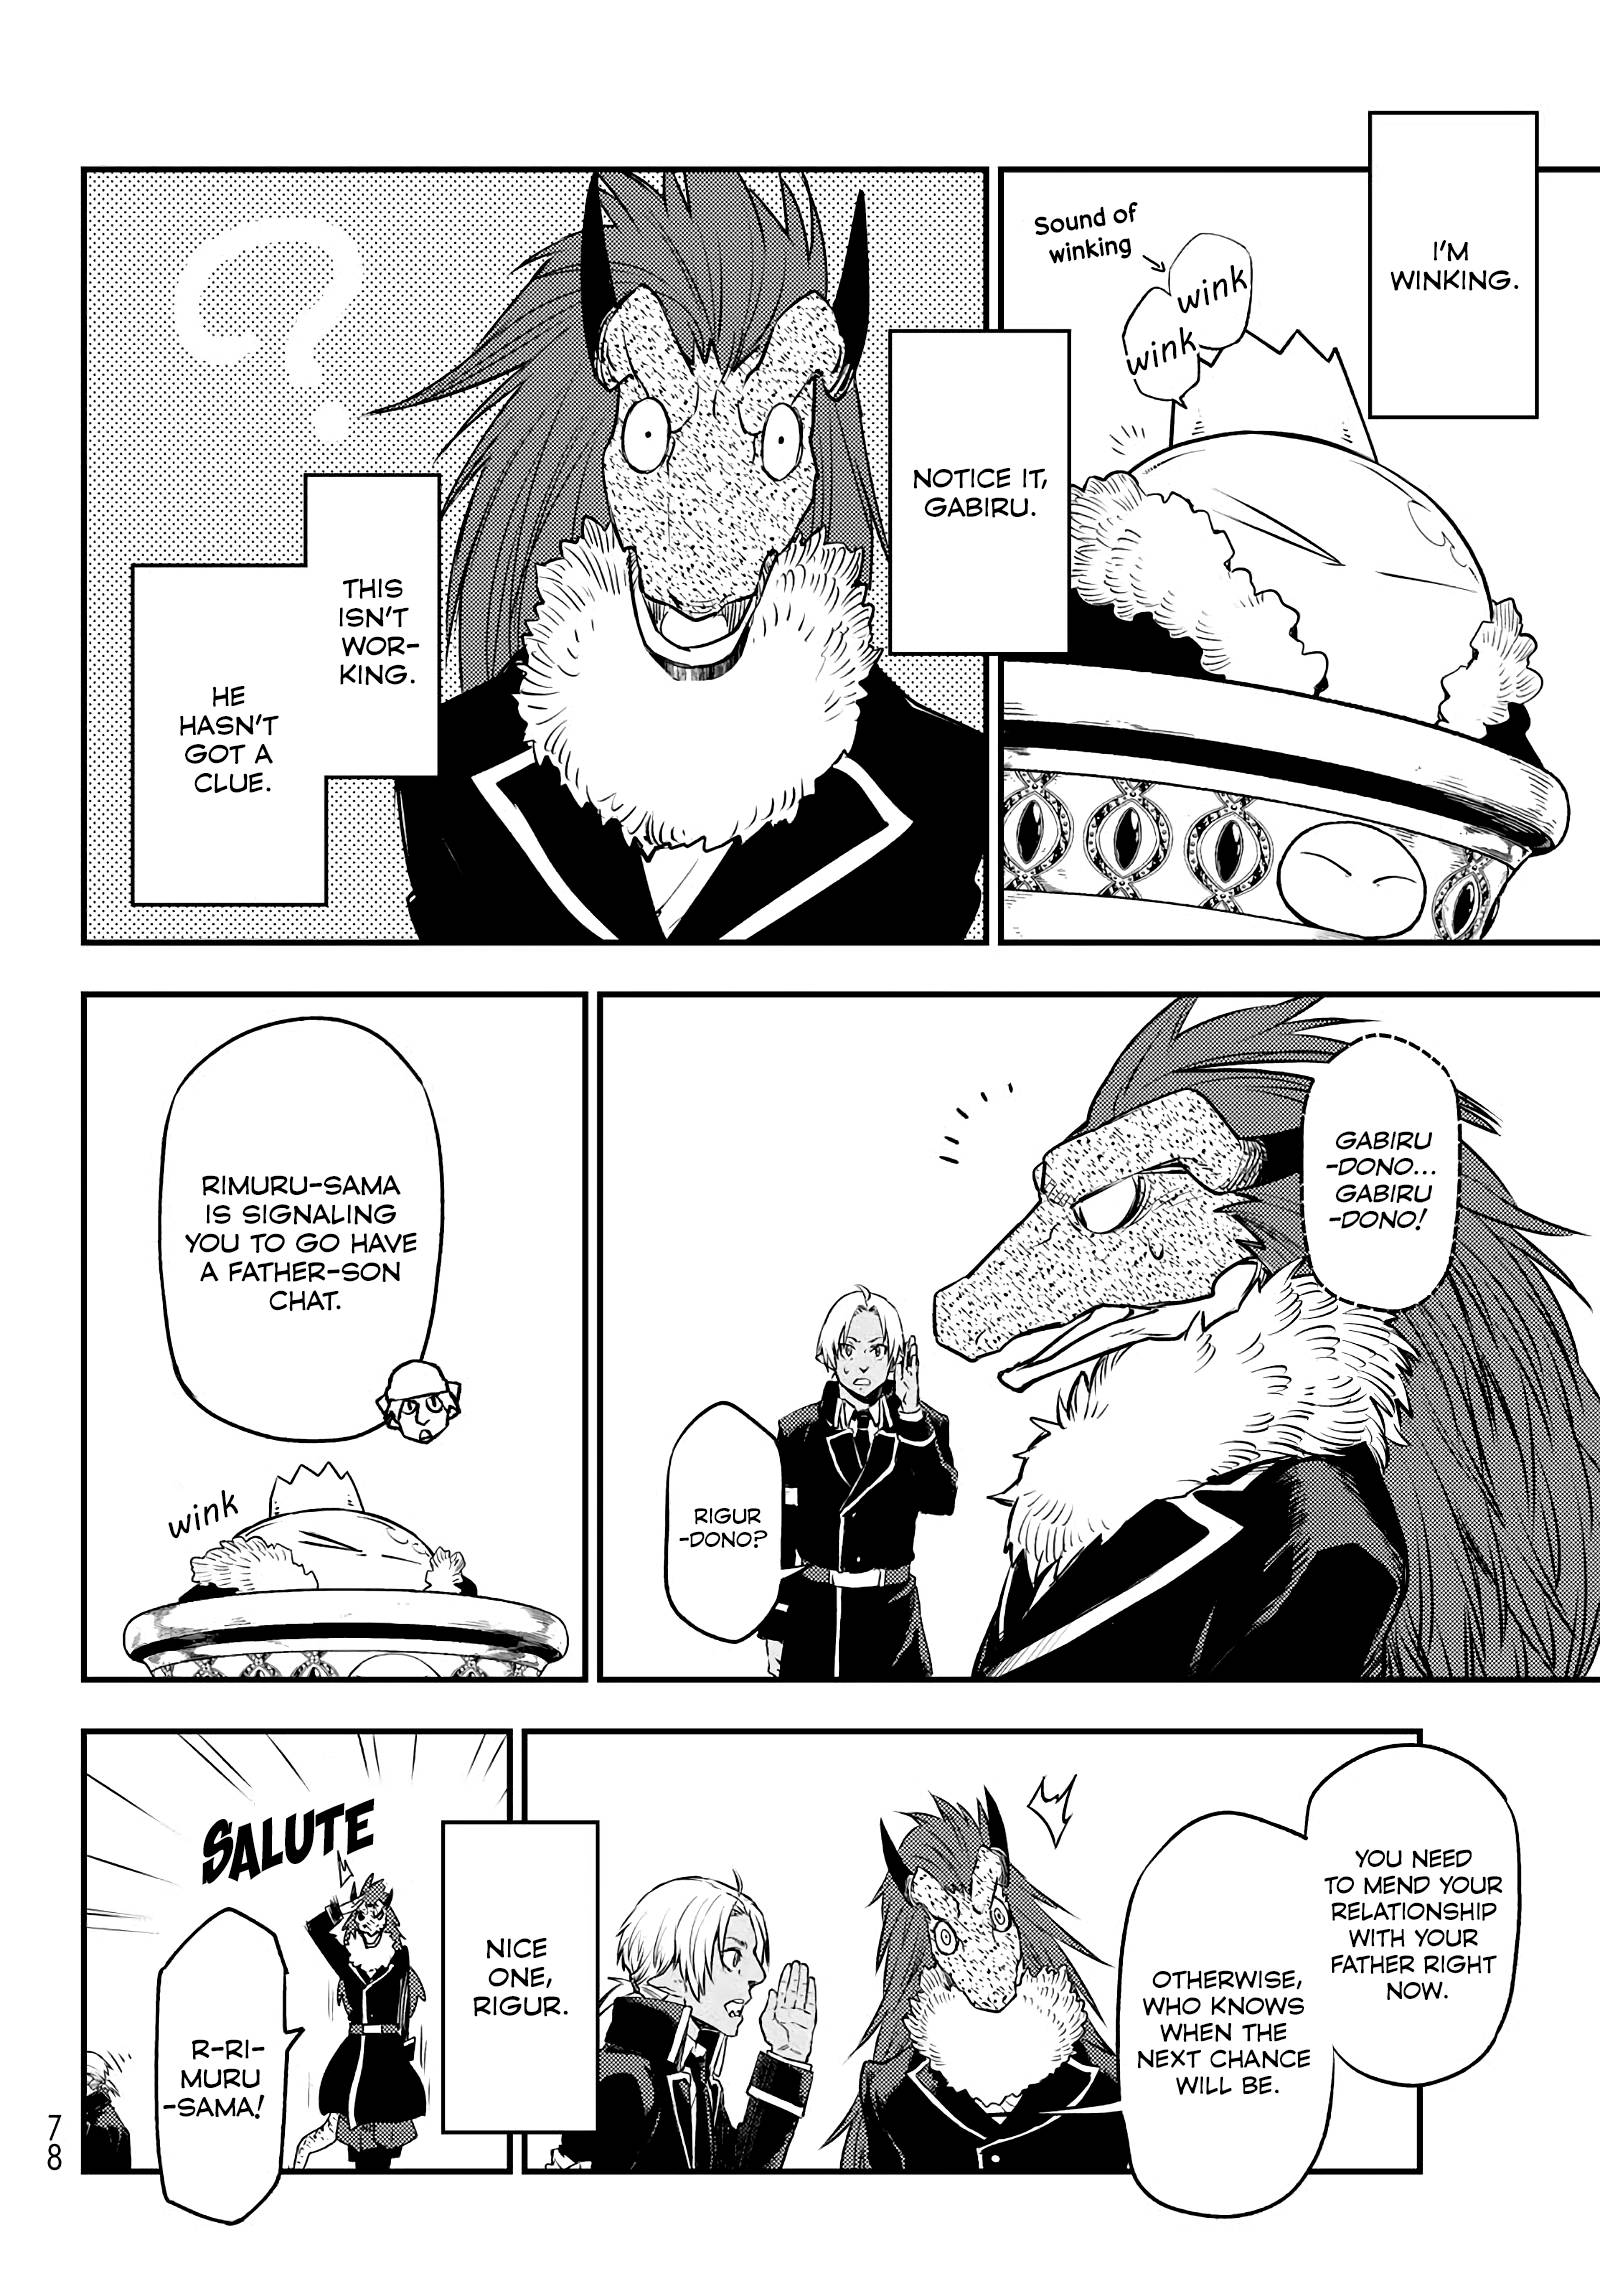 That Time I Got Reincarnated as a Slime, Chapter 106